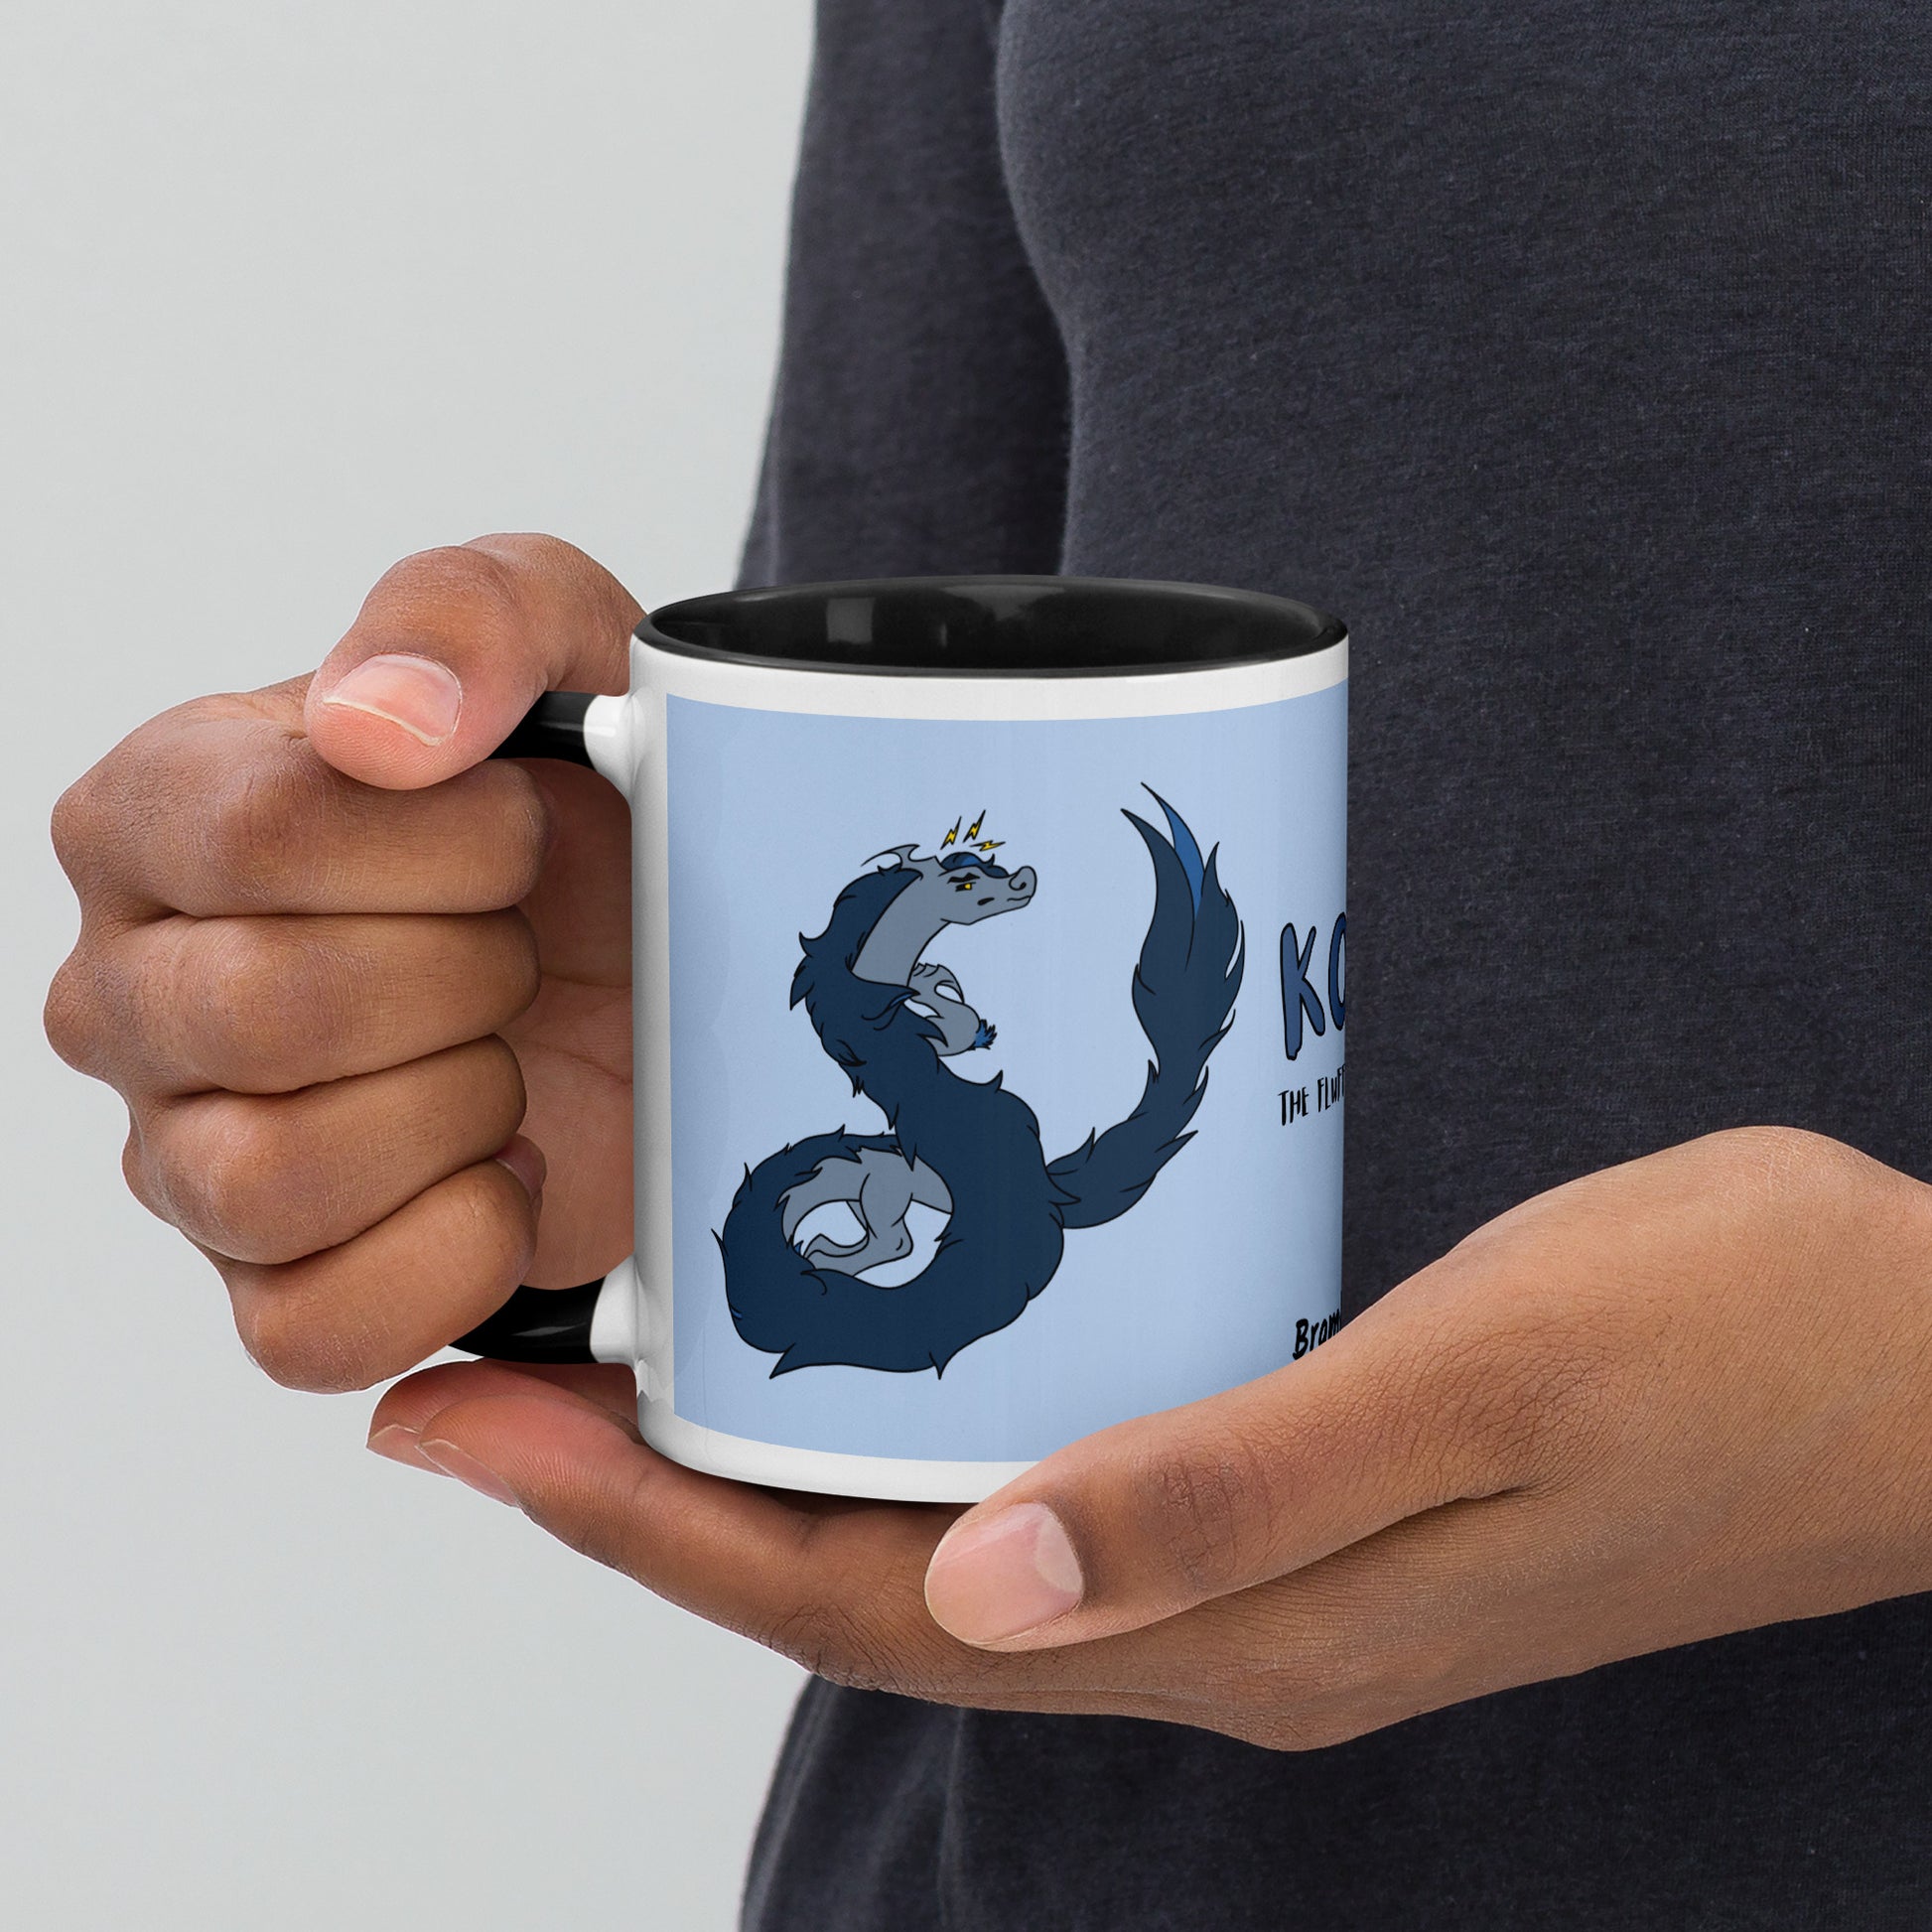 11 ounce ceramic mug featuring a double-sided image of angry Korvo the Fuzzy Noodle dragon against a light blue background.  Black inside and handle. Sitting in hands of model.